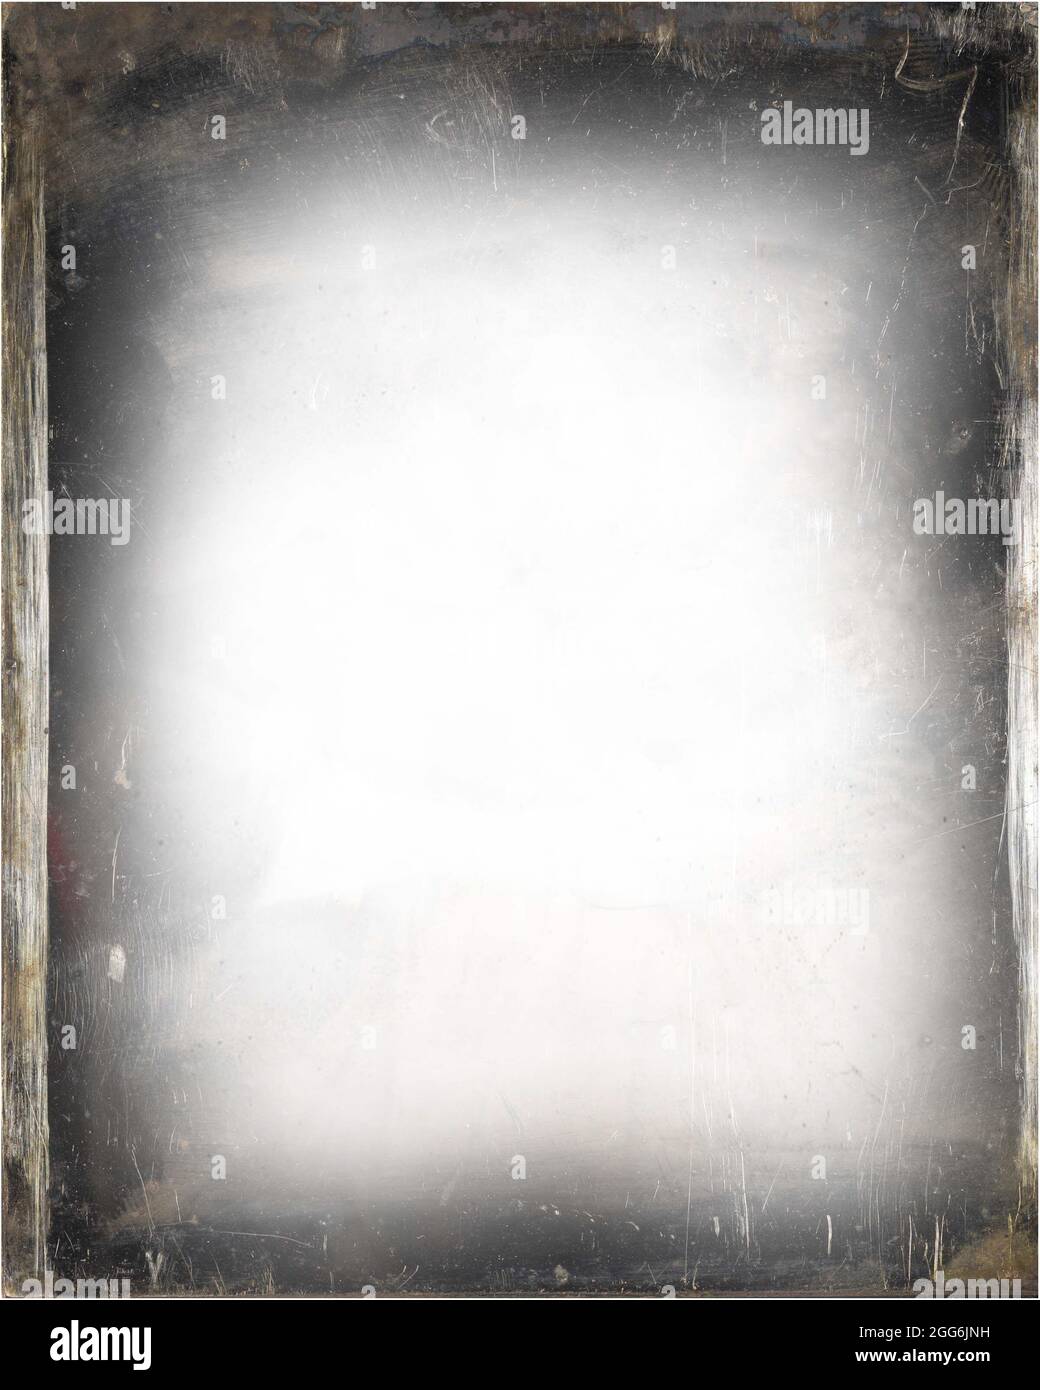 This is an antique or vintage style photo overlay or background to use in graphic design or photography projects Stock Photo